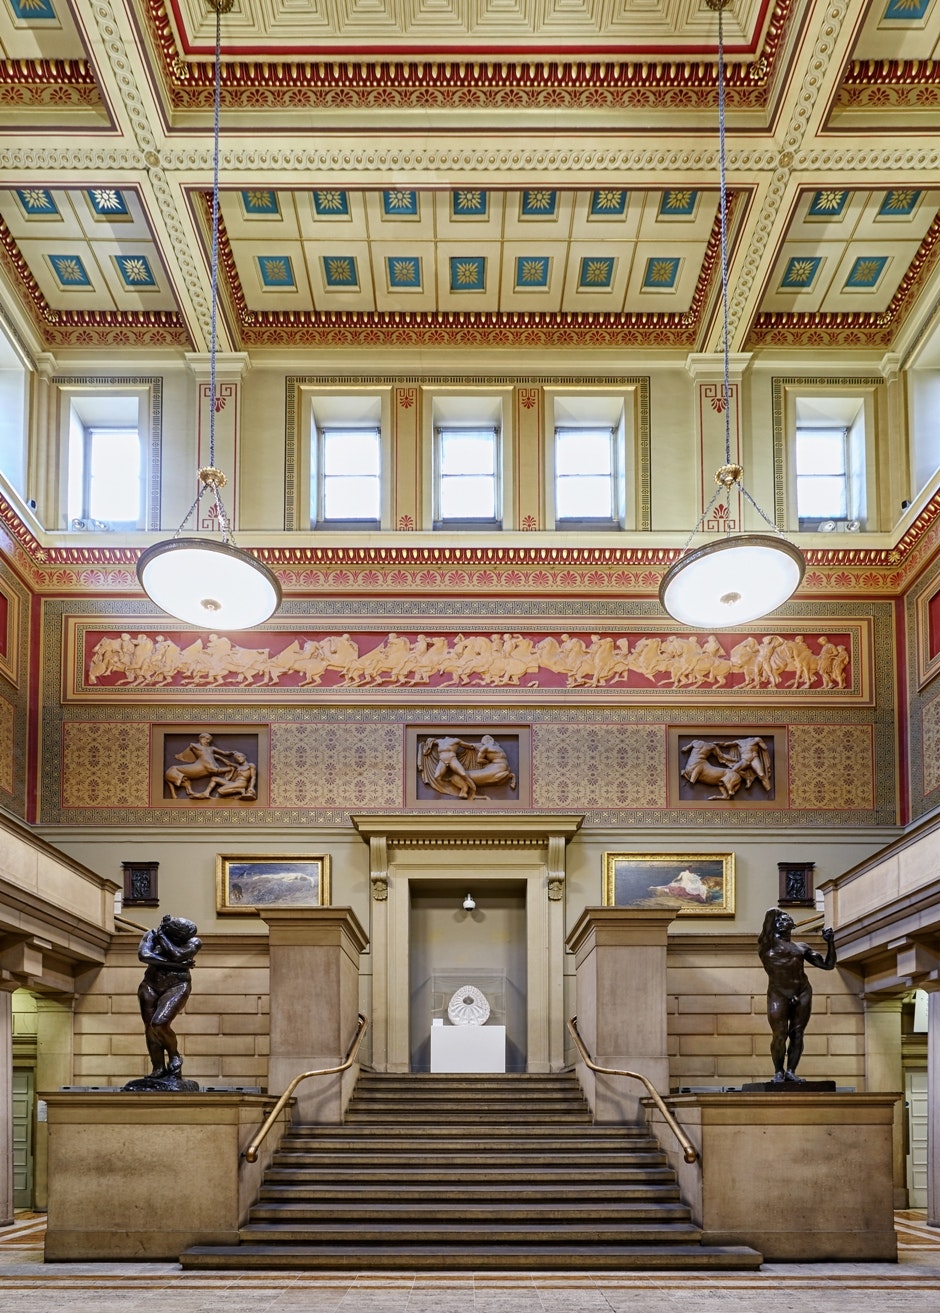 Manchester Art Gallery - Victorian Hall image 6